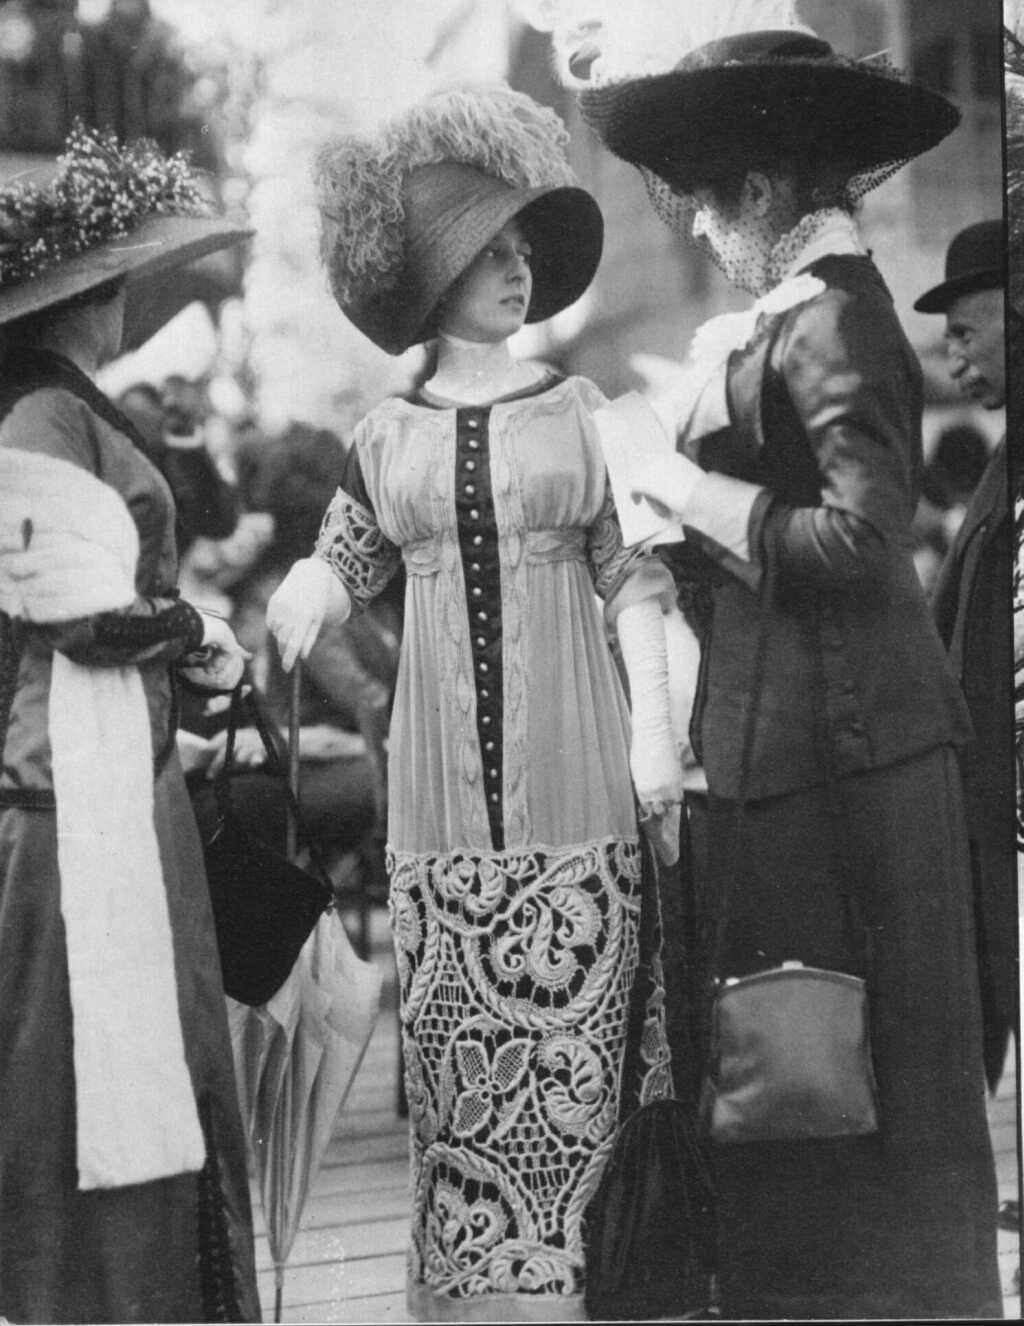 Women wearing high class fashion of the time in London, England in 1911.